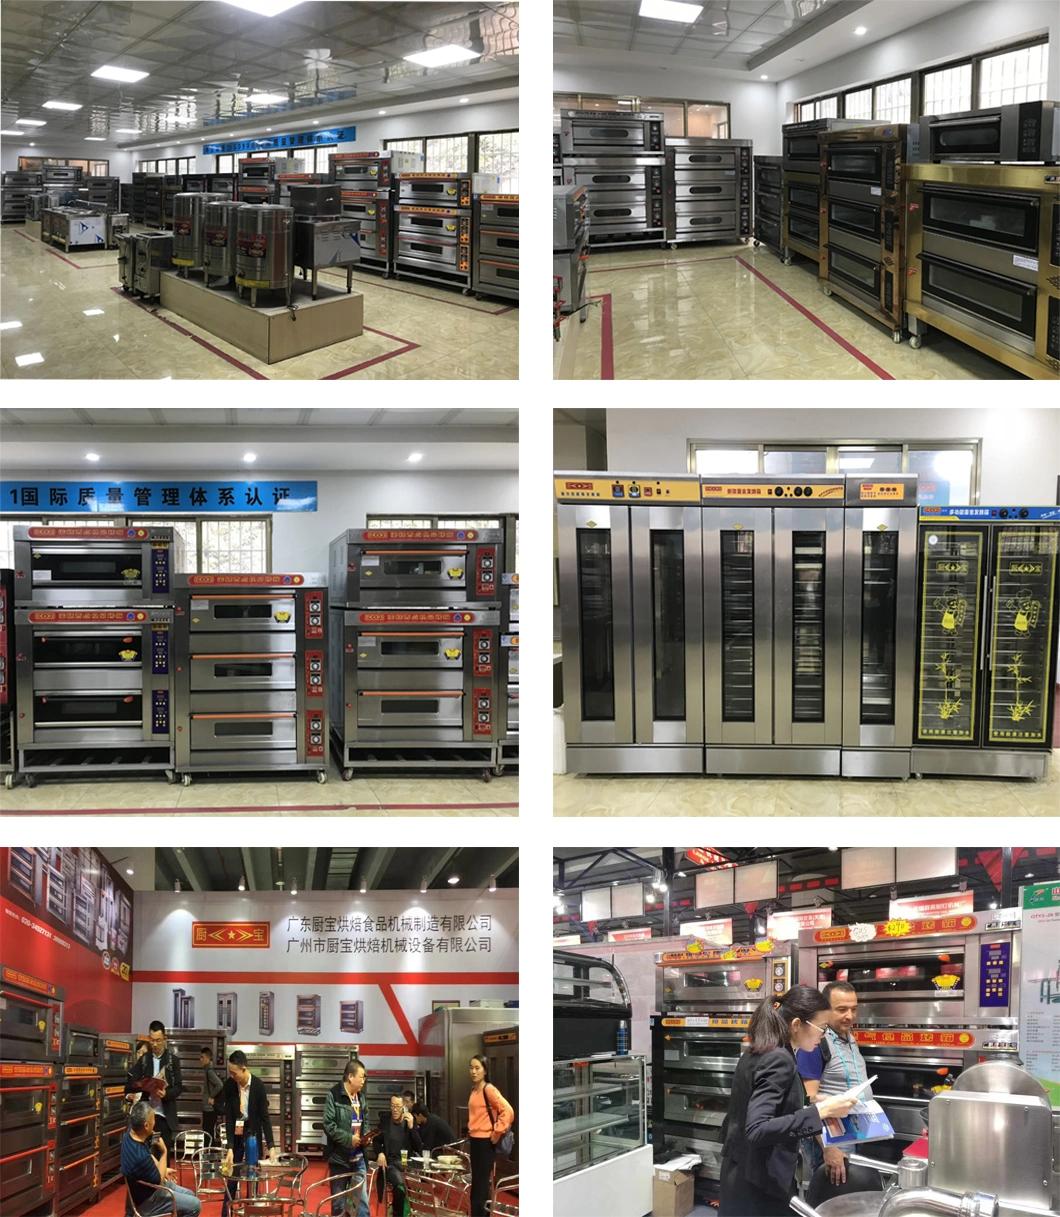 Commercial Kitchen 4 Deck 16 Trays Gas Oven for Restaurant Baking Equipment Bread Oven Bakery Machinery Food Machine